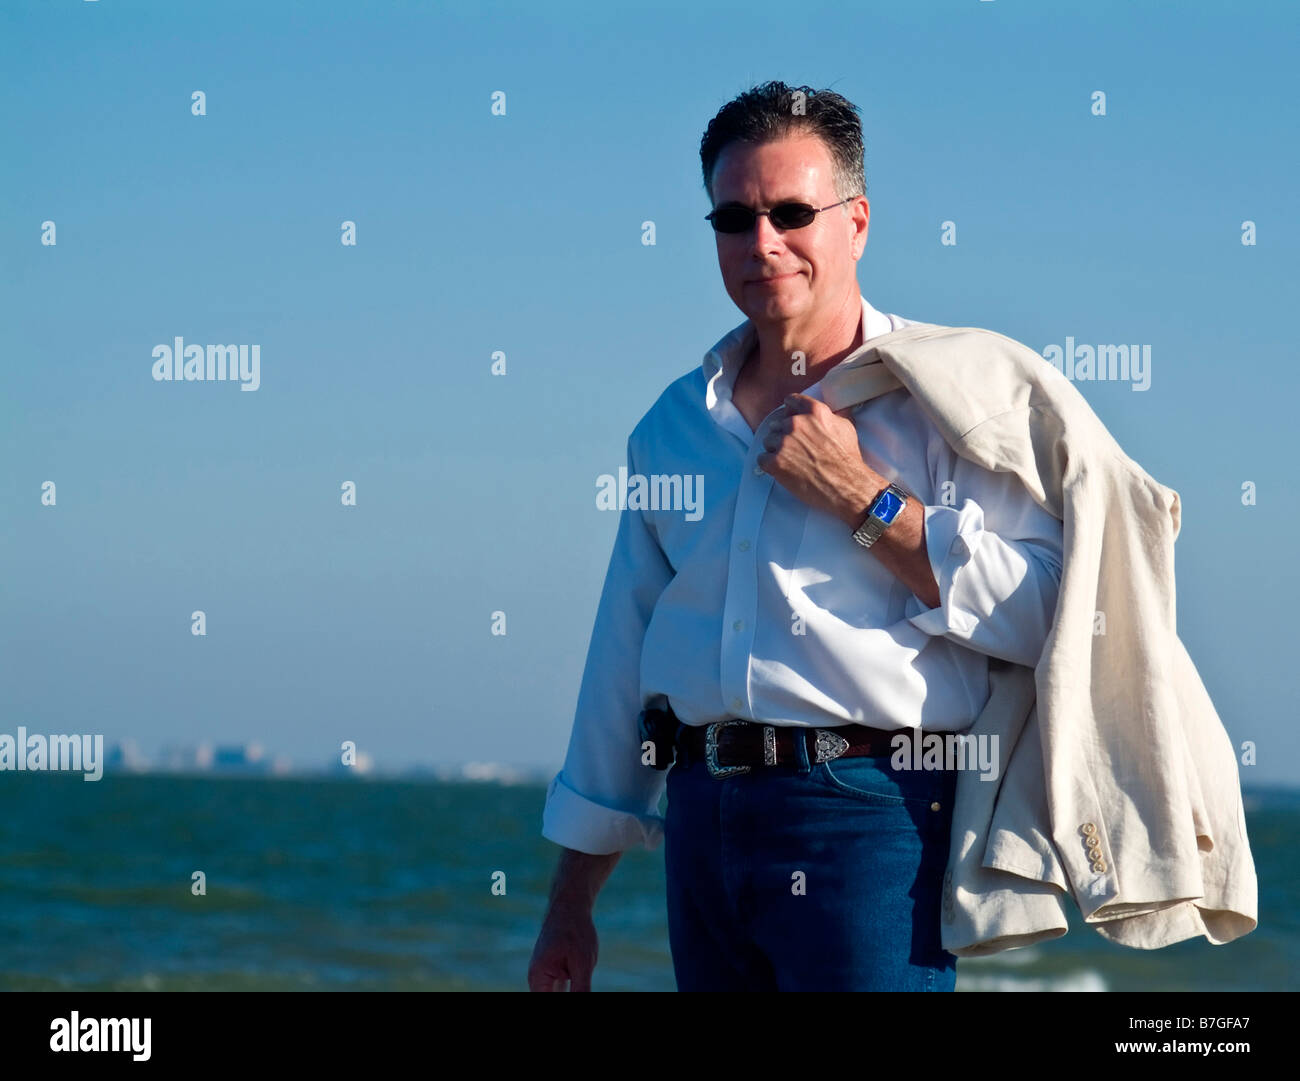 A man with sunglasses lit by late afternoon light with water and building in the background Stock Photo